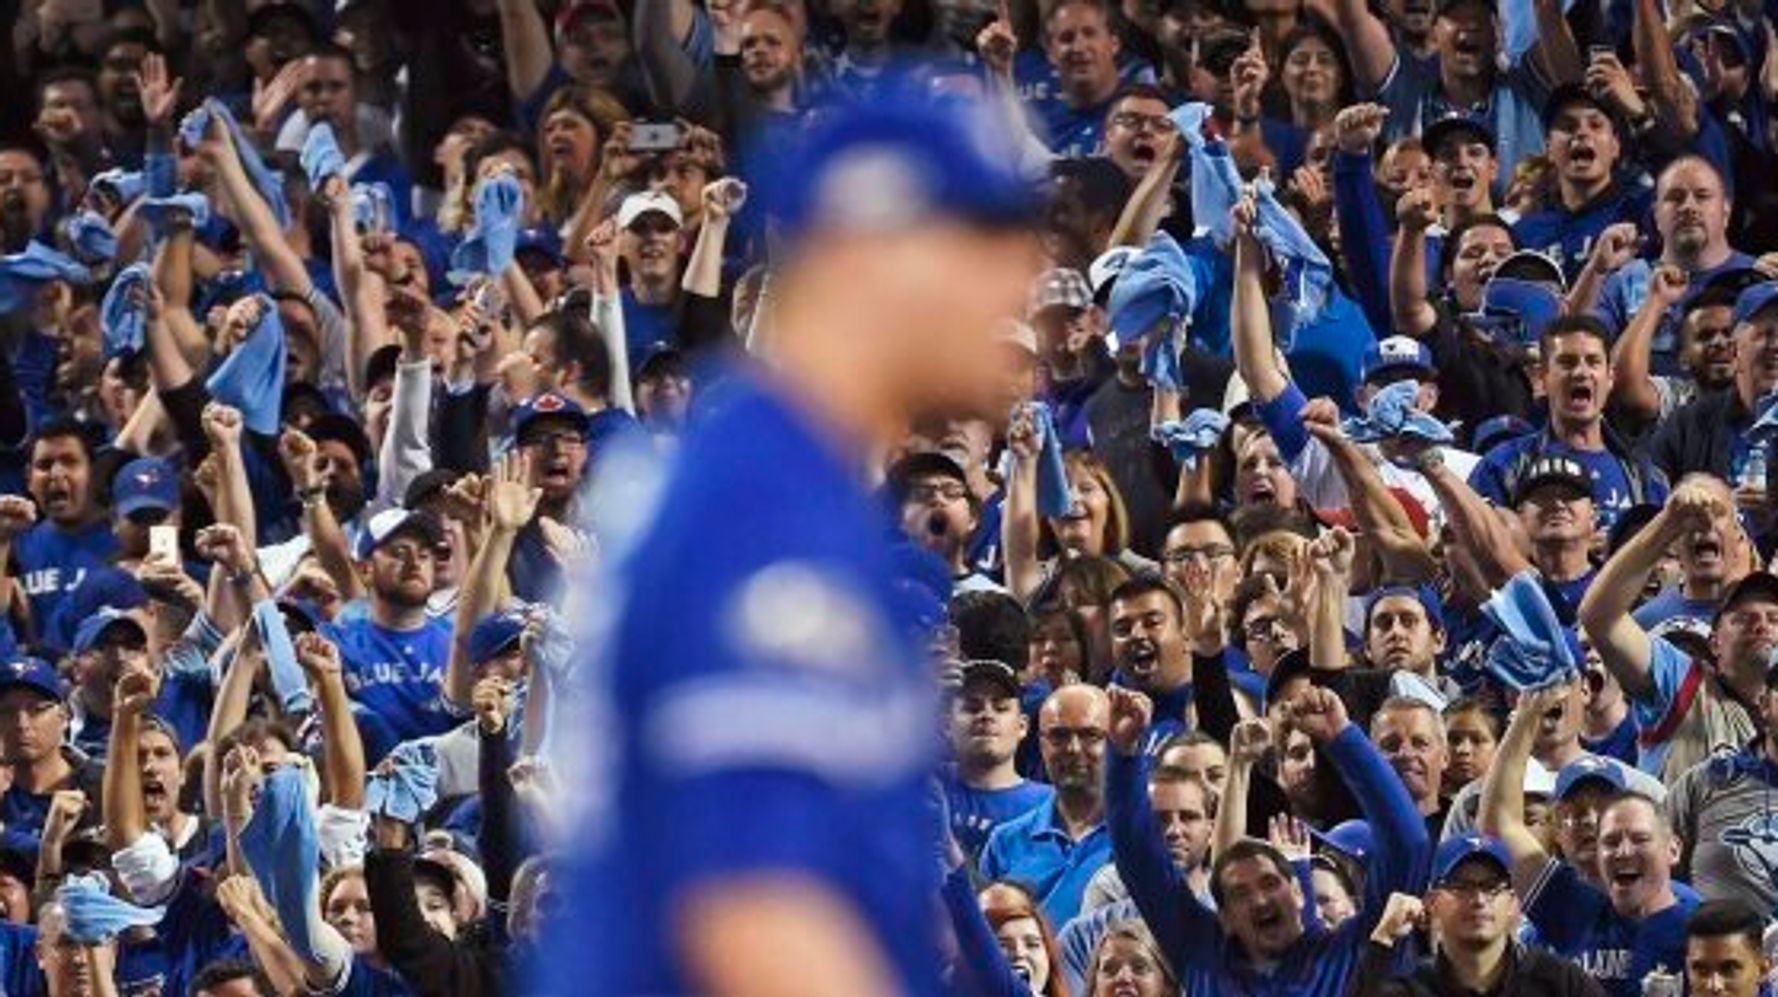 Forget the beer can, why weren't the Jays fans yelling racial slurs kicked  out?